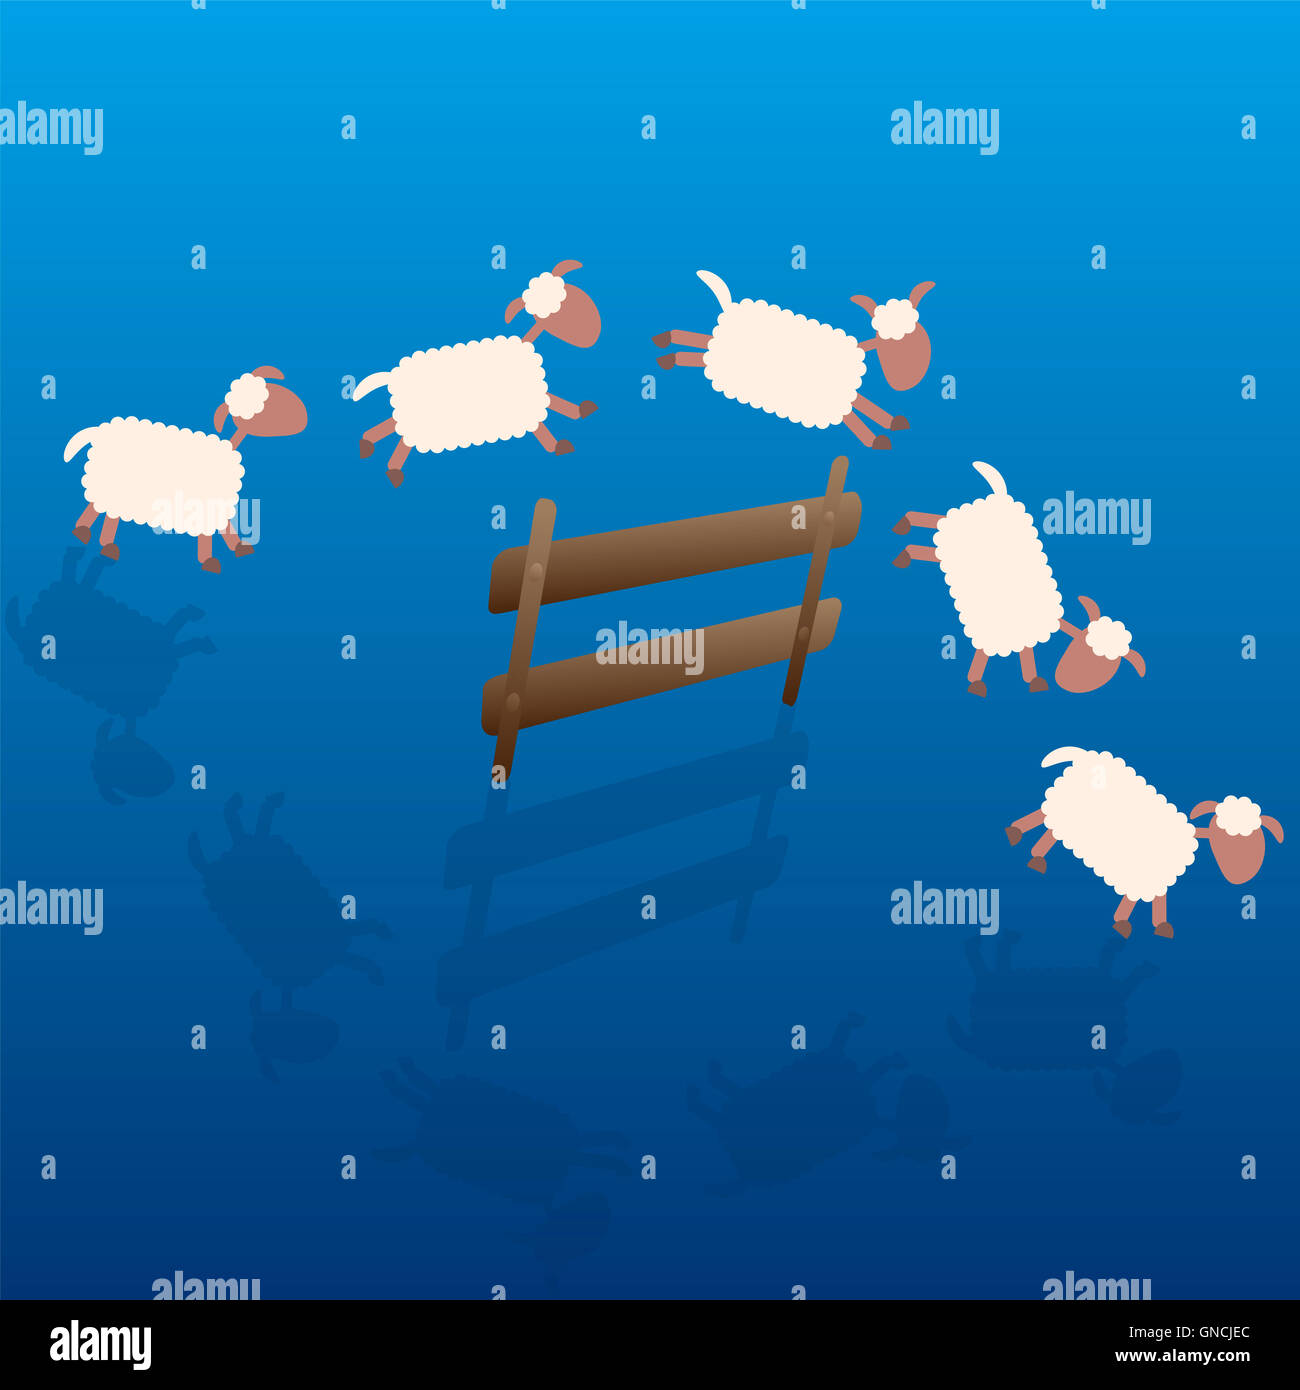 Counting sheep - cartoon illustration of sheep jumping over a wooden fence at night. Stock Photo